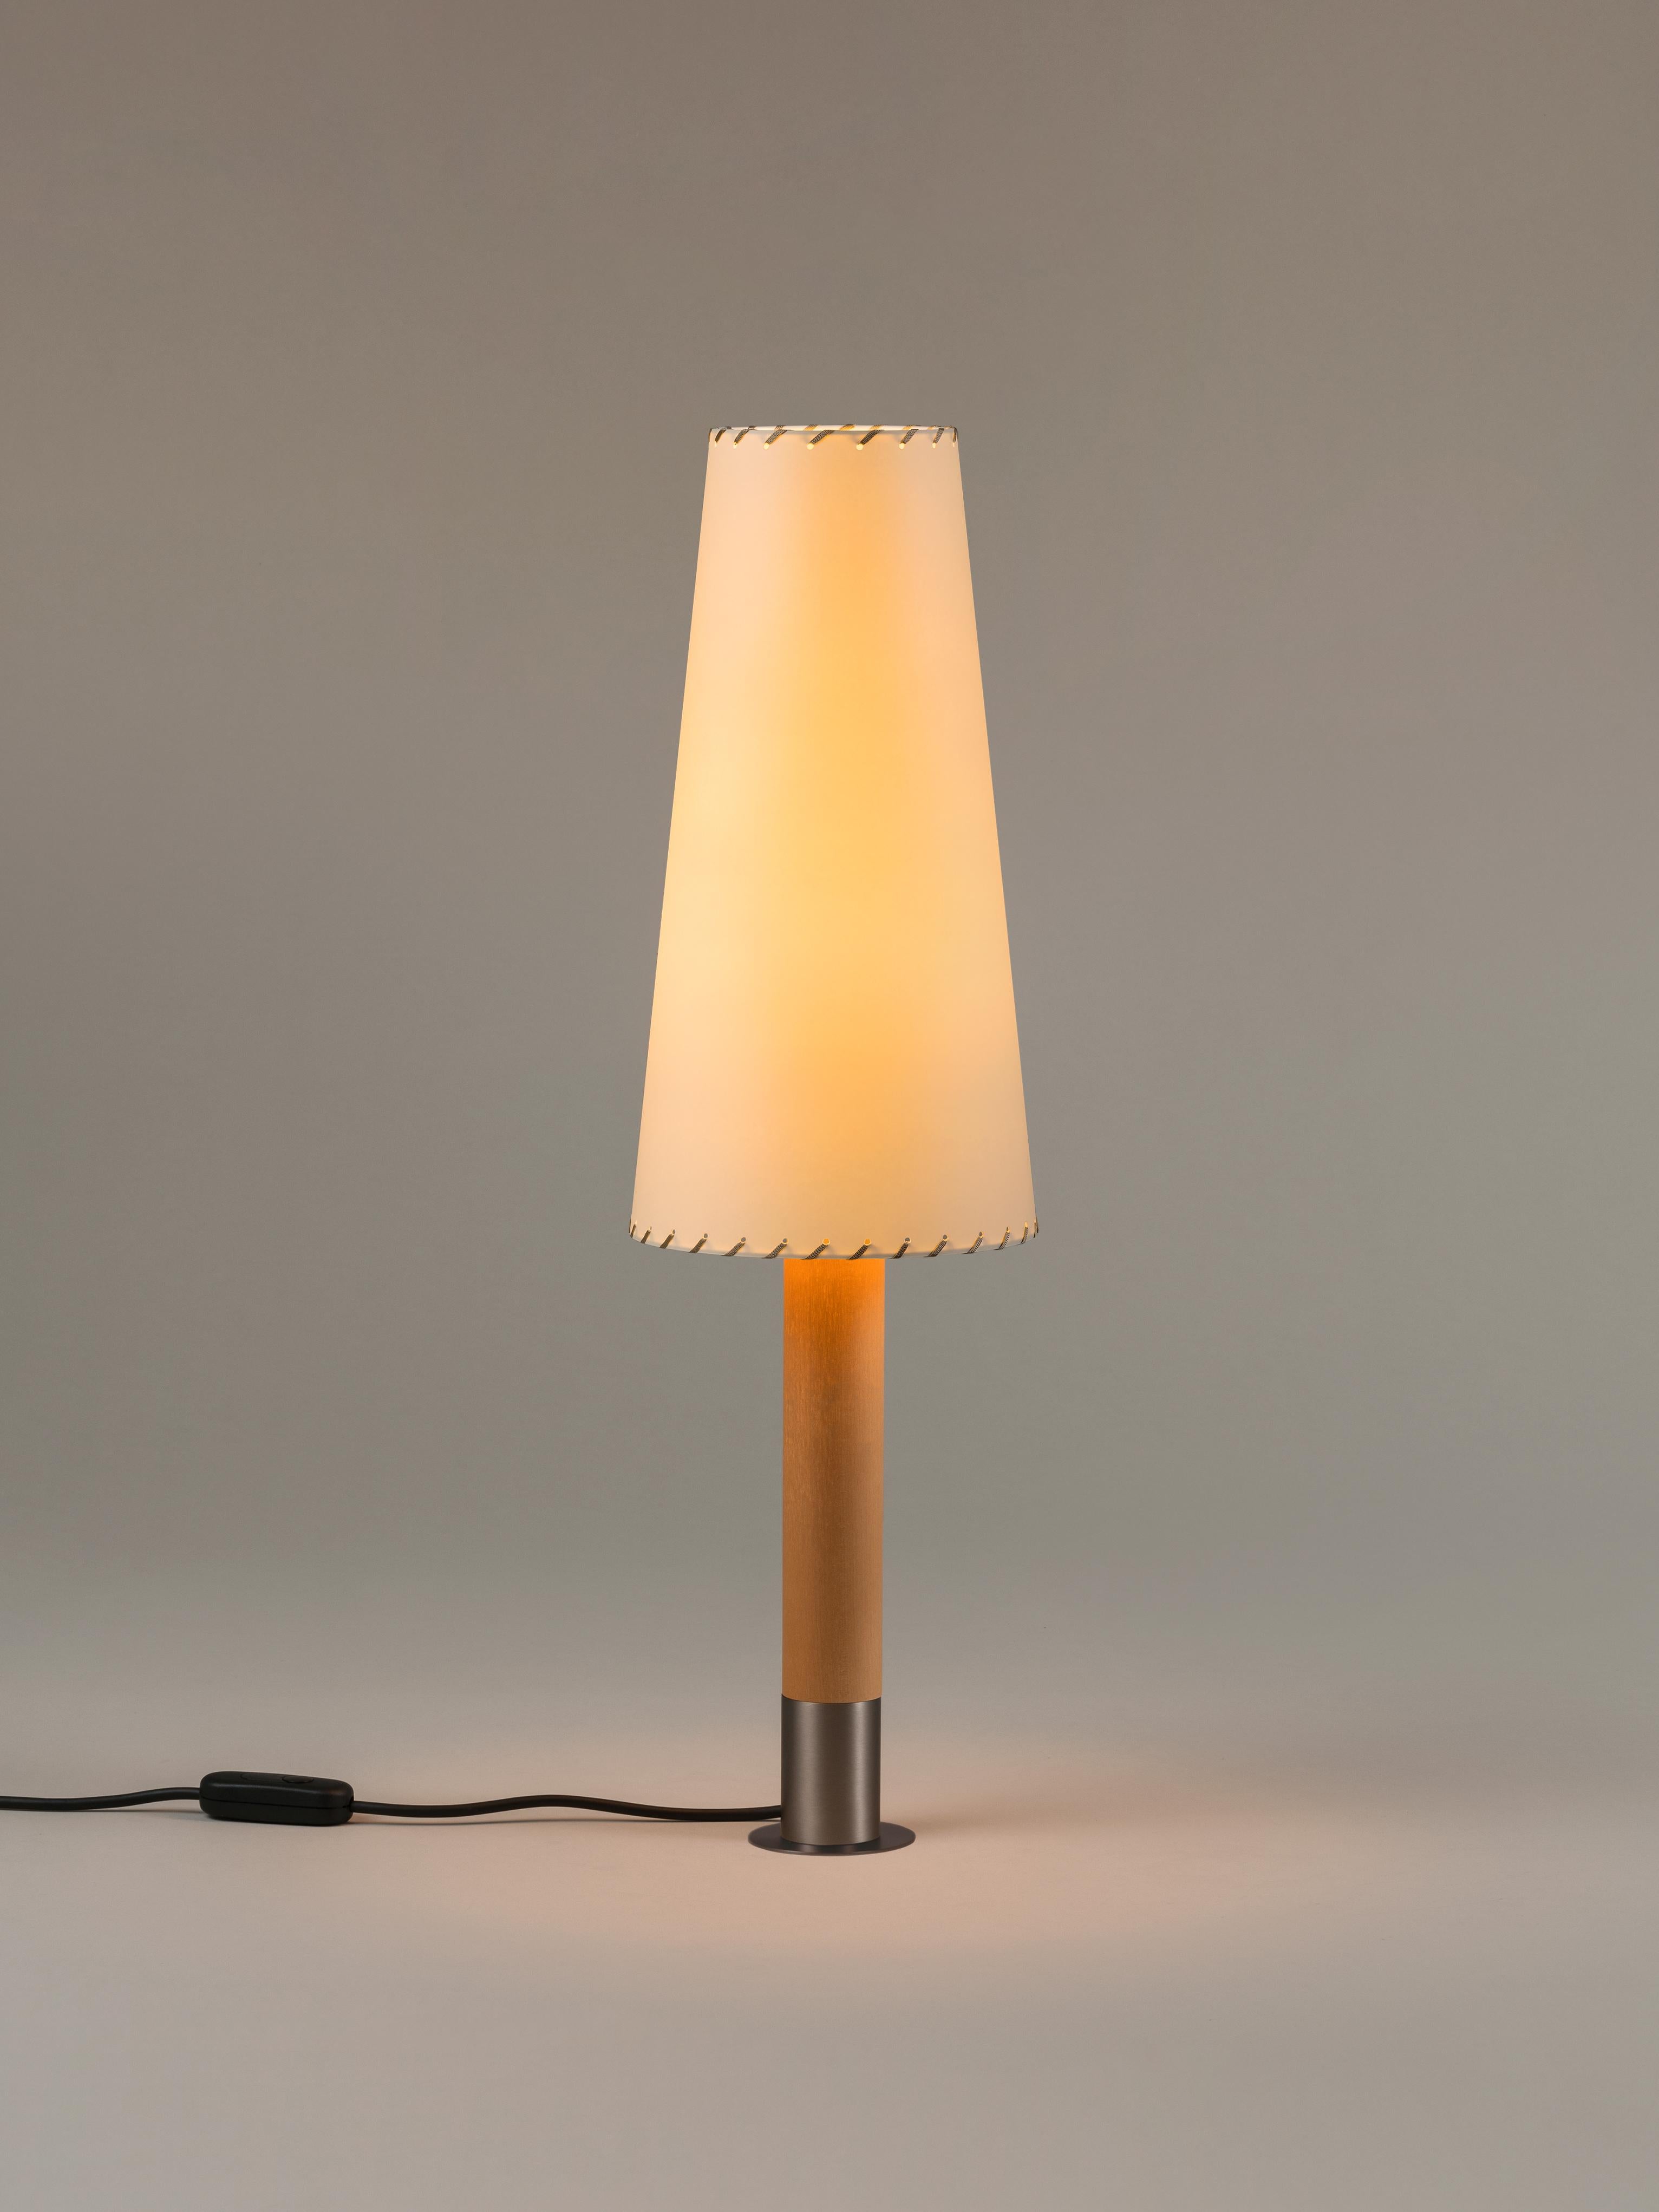 Nickel Básica M2 table lamp by Santiago Roqueta, Santa & Cole.
Dimensions: D 20 x H 71 cm.
Materials: Nickel, birch wood, paperboard.
Available in nickel or bronze and with or without the stabilizing disc.

The Básica lamp champions the return to